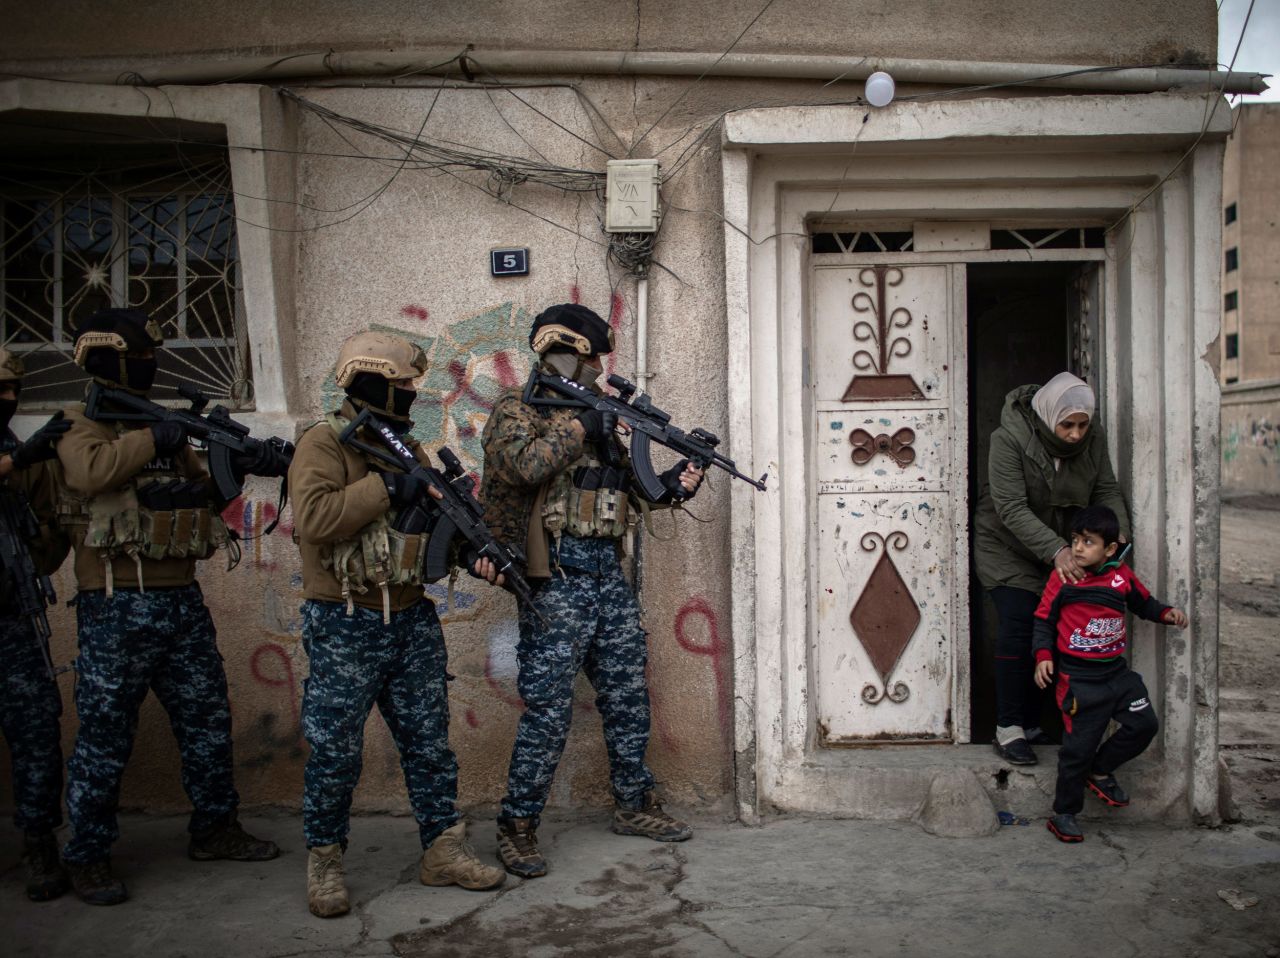 A woman and her children leave their home in Hasakah, Syria, as Kurdish special forces went house to house conducting searches for escaped prisoners on Thursday, January 27. It was days after several ISIS members <a href="https://www.cnn.com/2020/03/30/middleeast/isis-prison-escape-syria-intl-hnk/index.html" target="_blank">escaped from a nearby prison.</a>